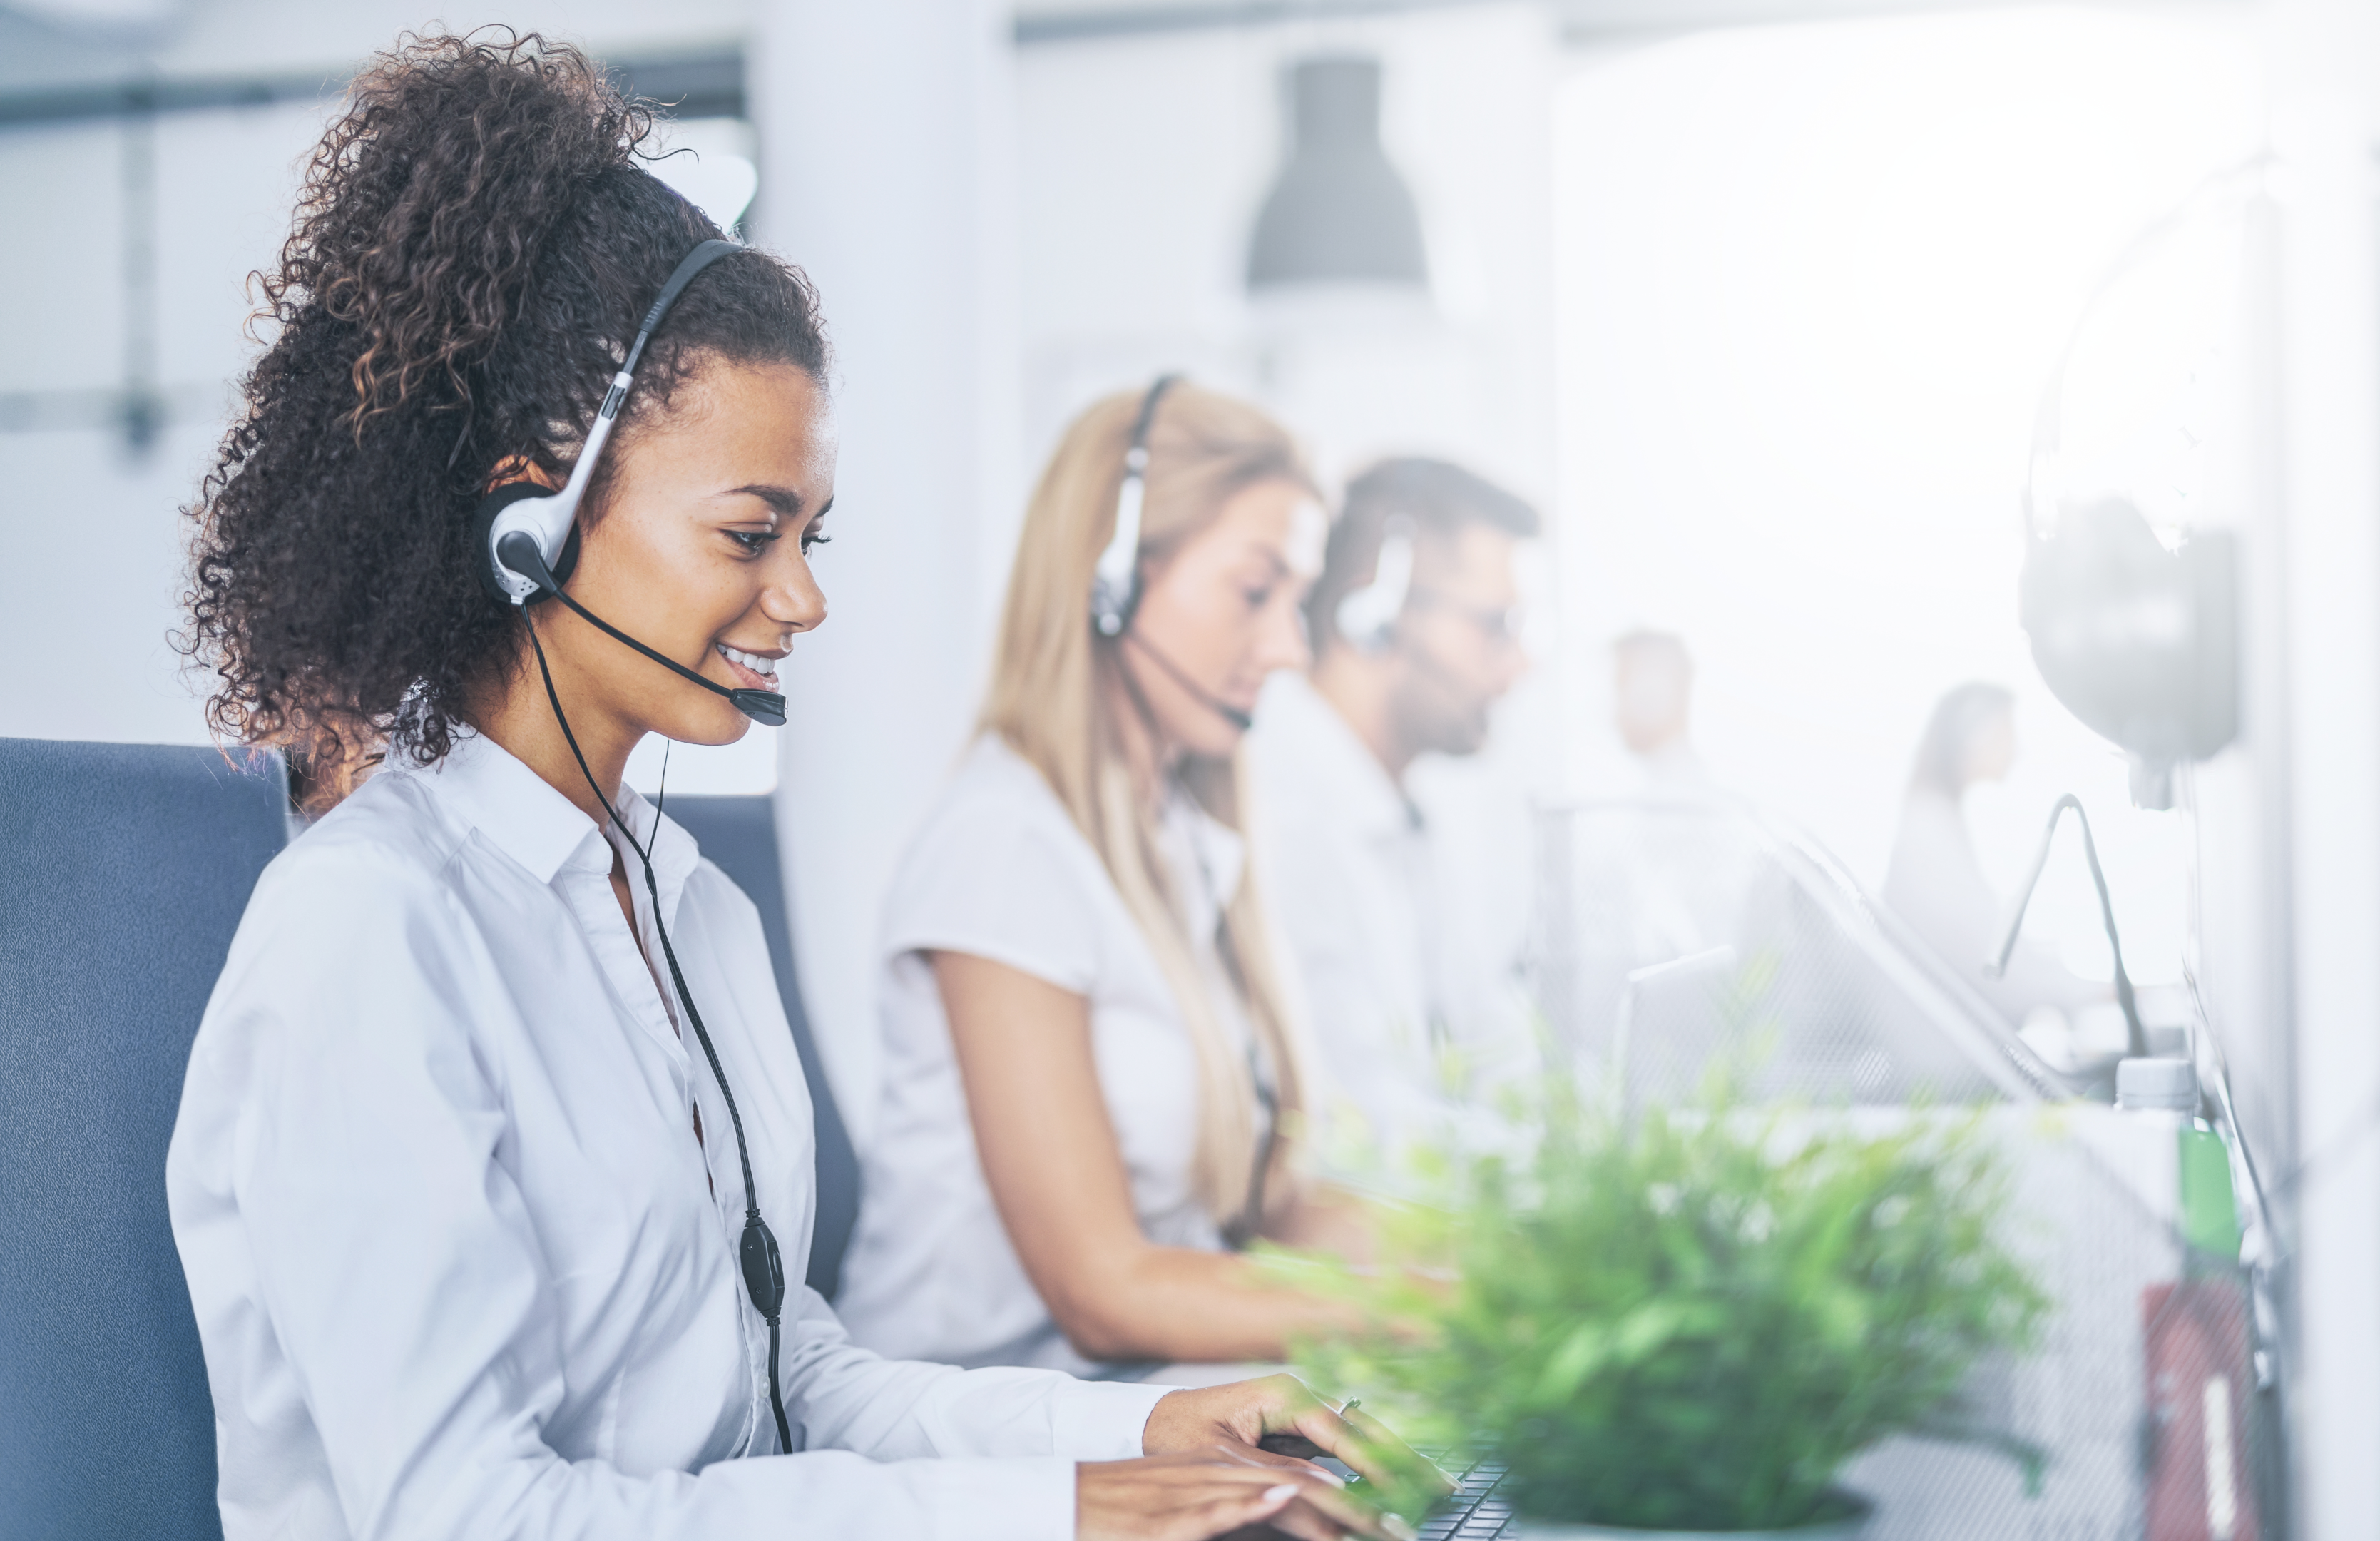 The customer support team should be able to creat a customer service experience for new customers, angry customers, and potential customers.